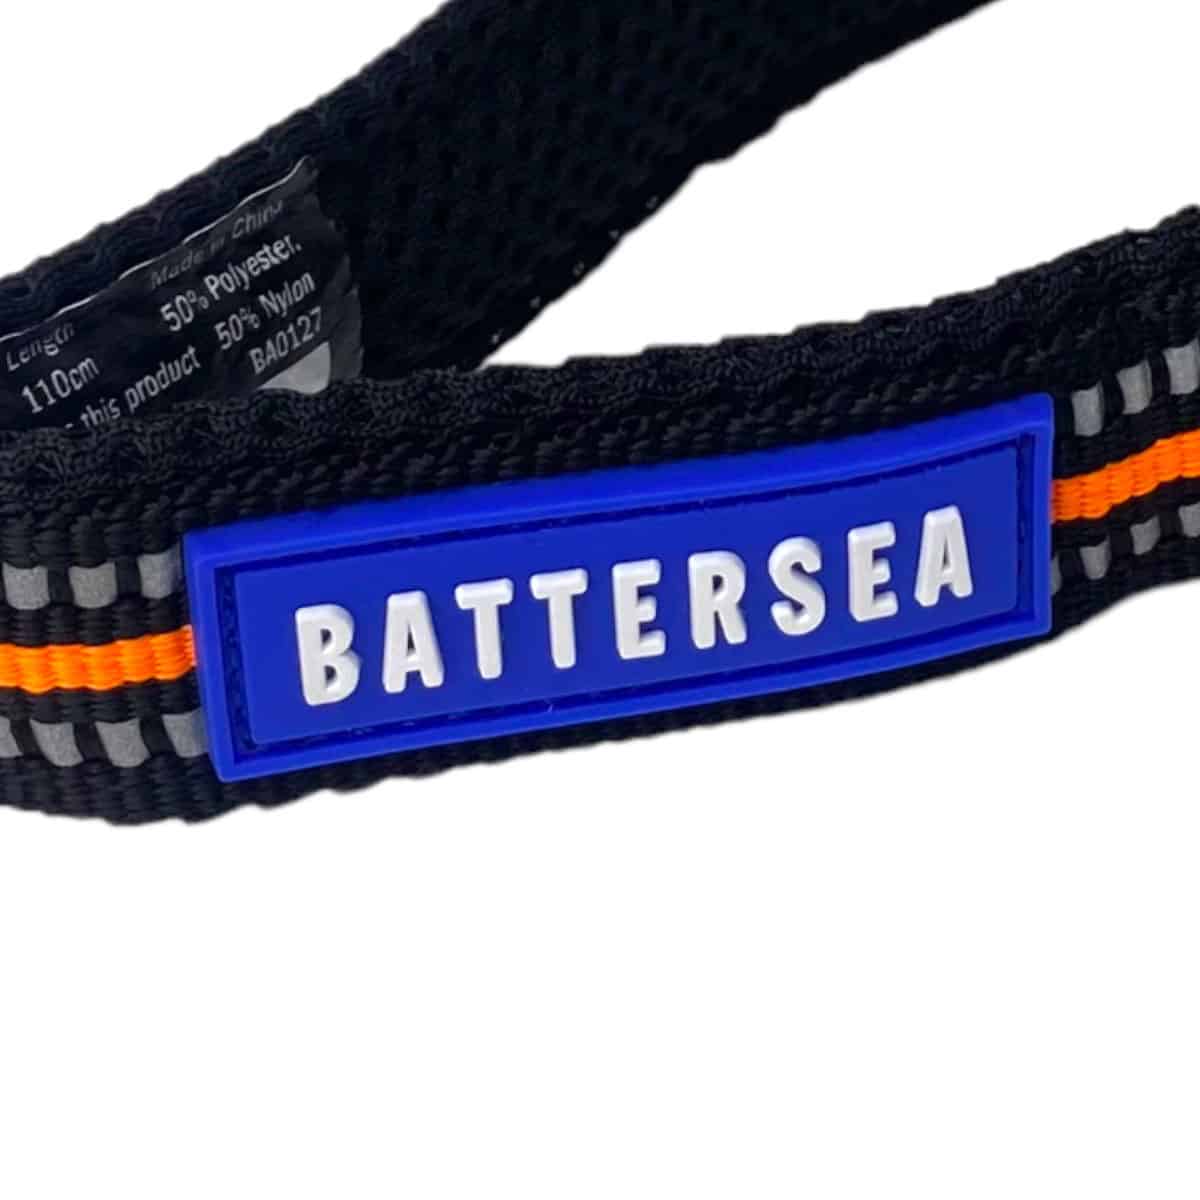 Take your dog walks to the next level with the Battersea Reflective Dog Lead! This 110 cm long lead is designed to keep your furry friend safe in dimly lit conditions - breanding